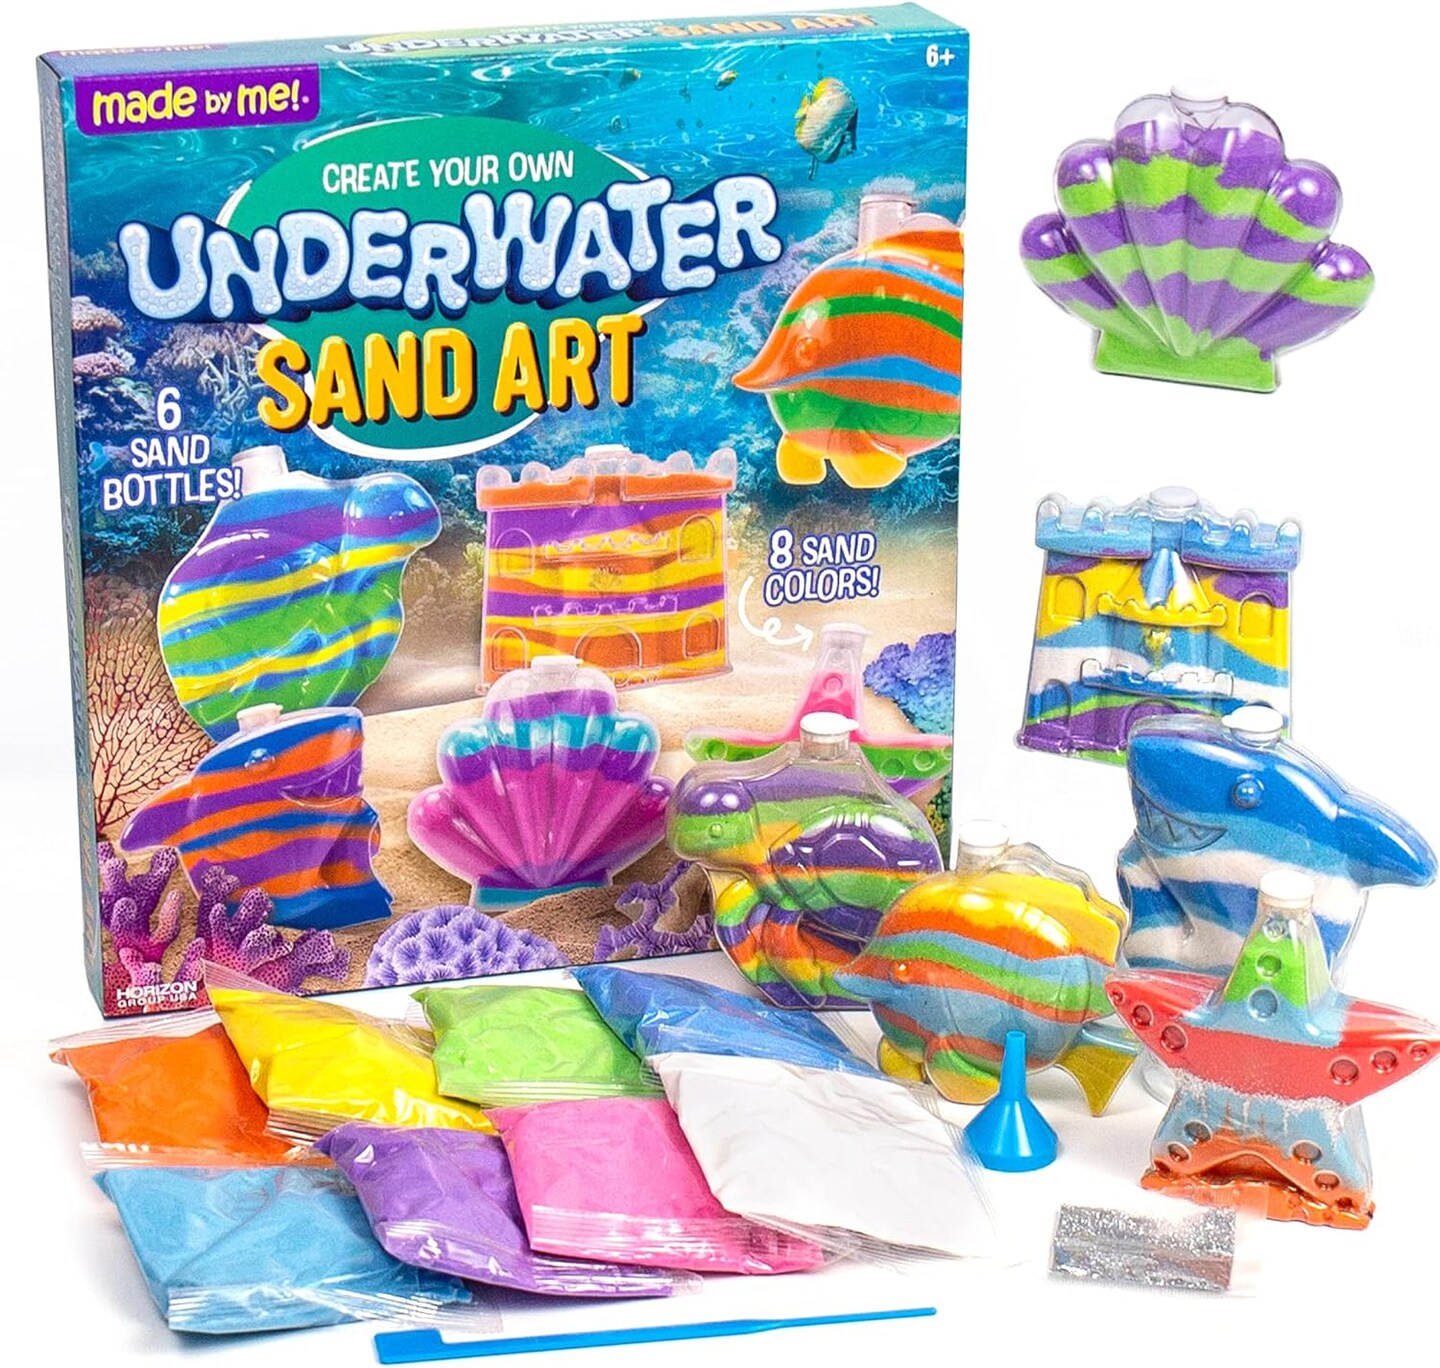 Create Your Own Underwater Sand Art with 6 Ocean-Themed Bottles, 8 Sand Colors, Glitter, and Funnel. Excellent Staycation or Group Activity, Party Idea DIY Sand Art for Children Ages 6, 7, 8, and 9